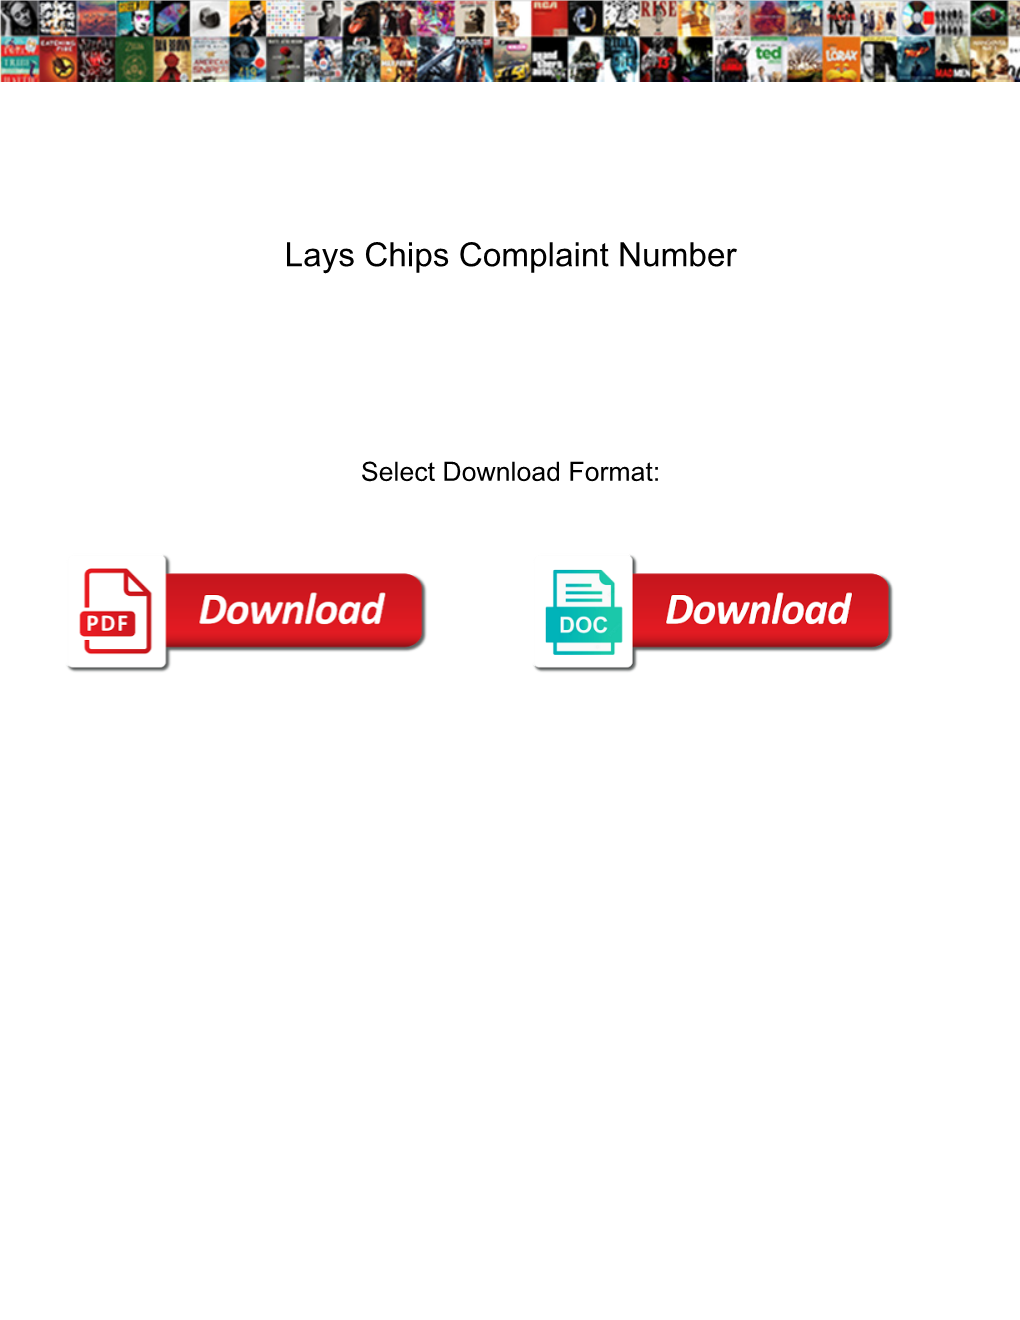 Lays Chips Complaint Number